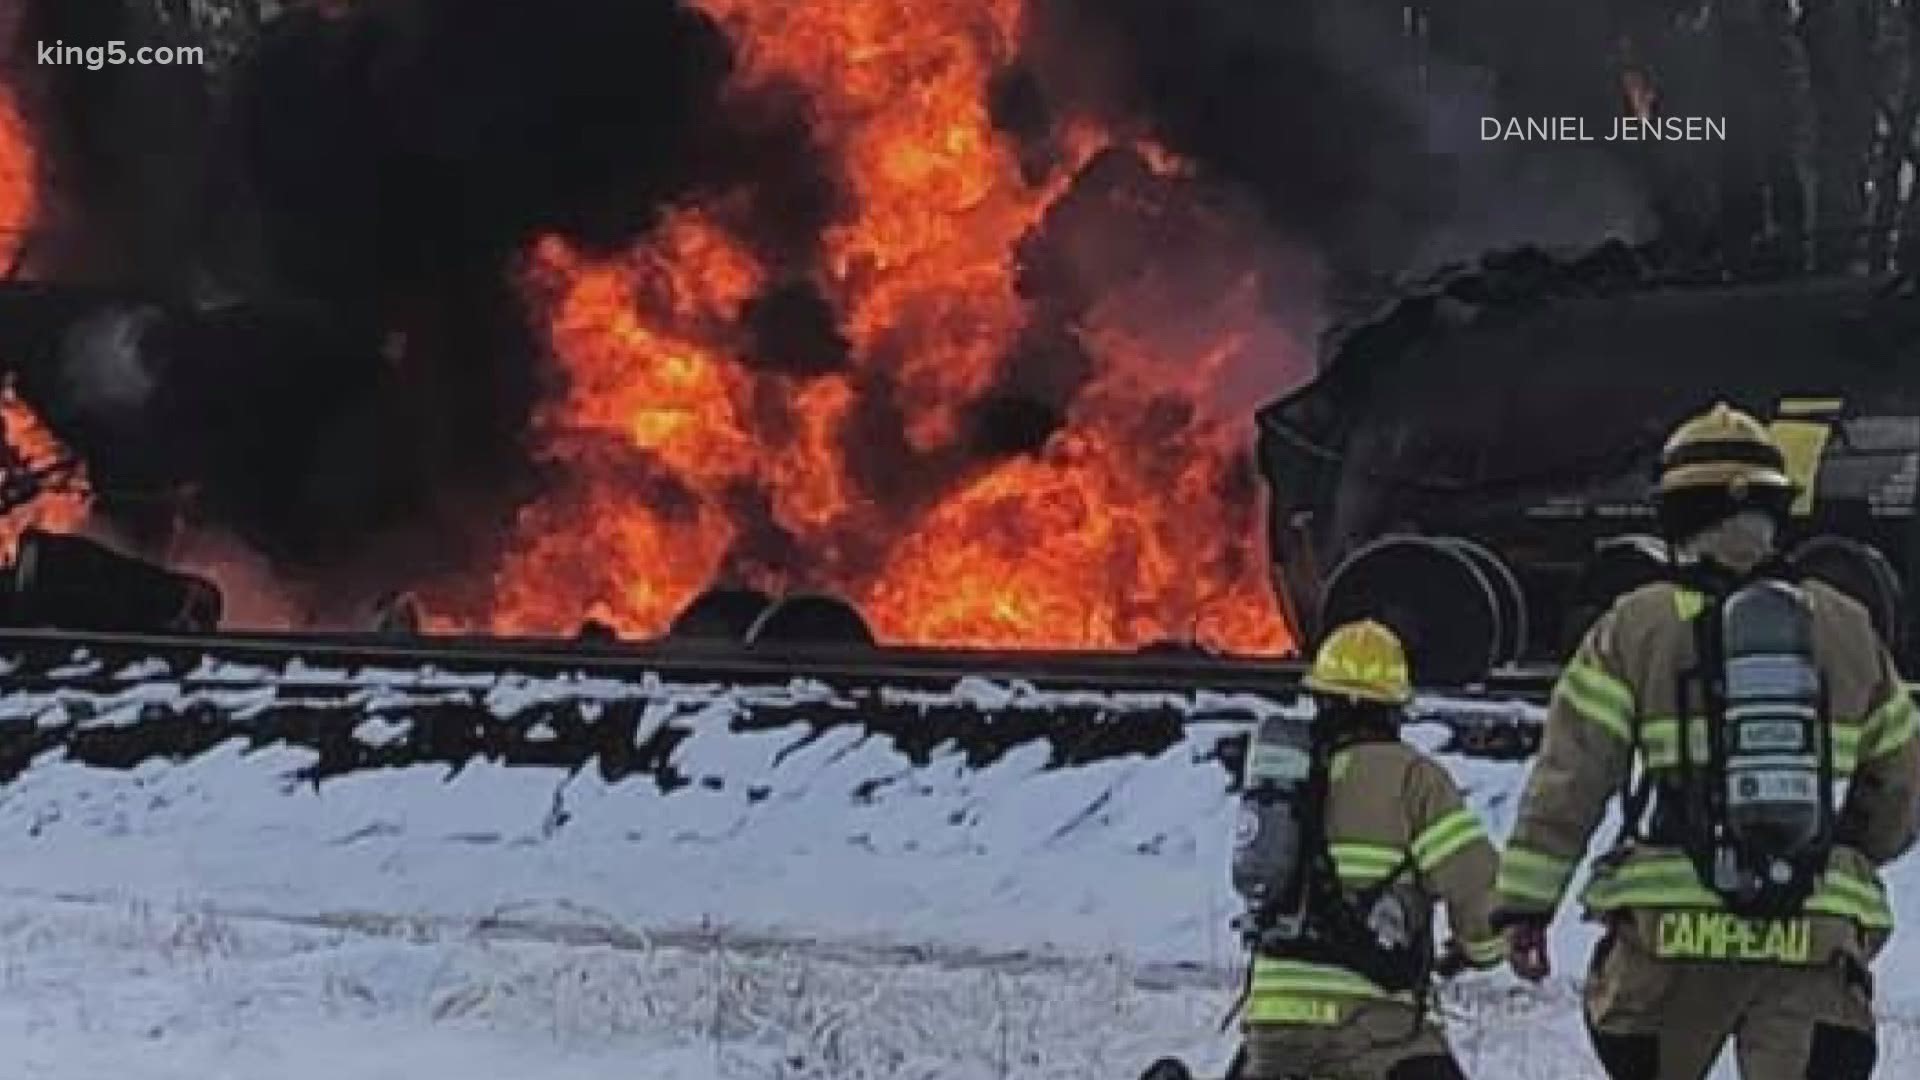 Six tanker train cars derailed in the Custer area of Whatcom County and caught fire Tuesday. There are no reports of injuries.